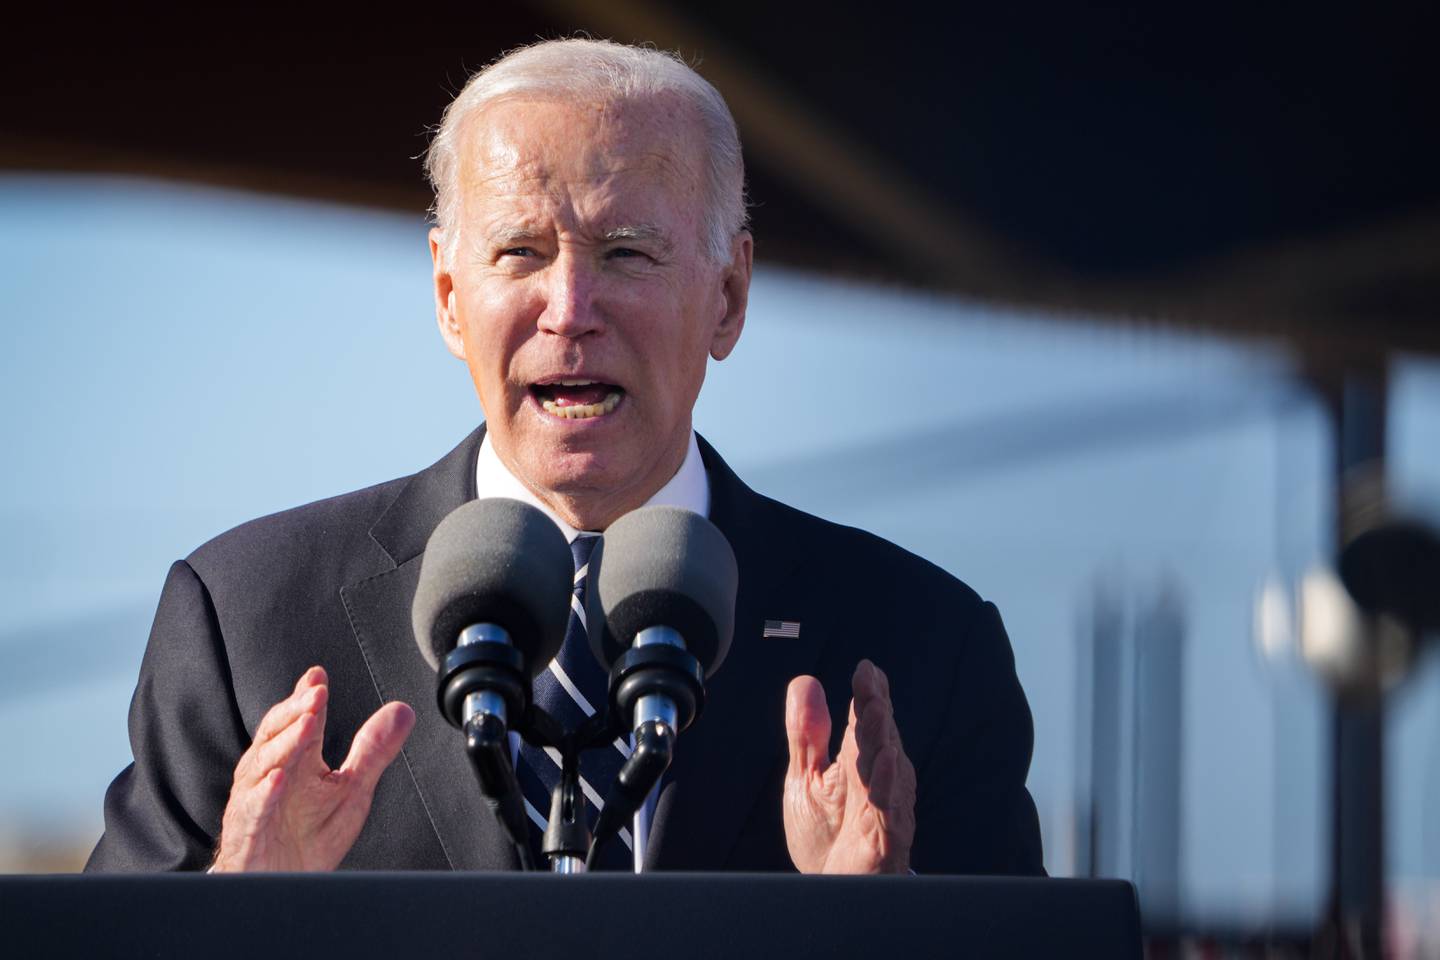 President Joe Biden speaks during a visit to Baltimore on 1/30/23. Biden touted Bipartisan Infrastructure Law funding—which will help to replace the 150-year-old Baltimore and Potomac Tunnel.